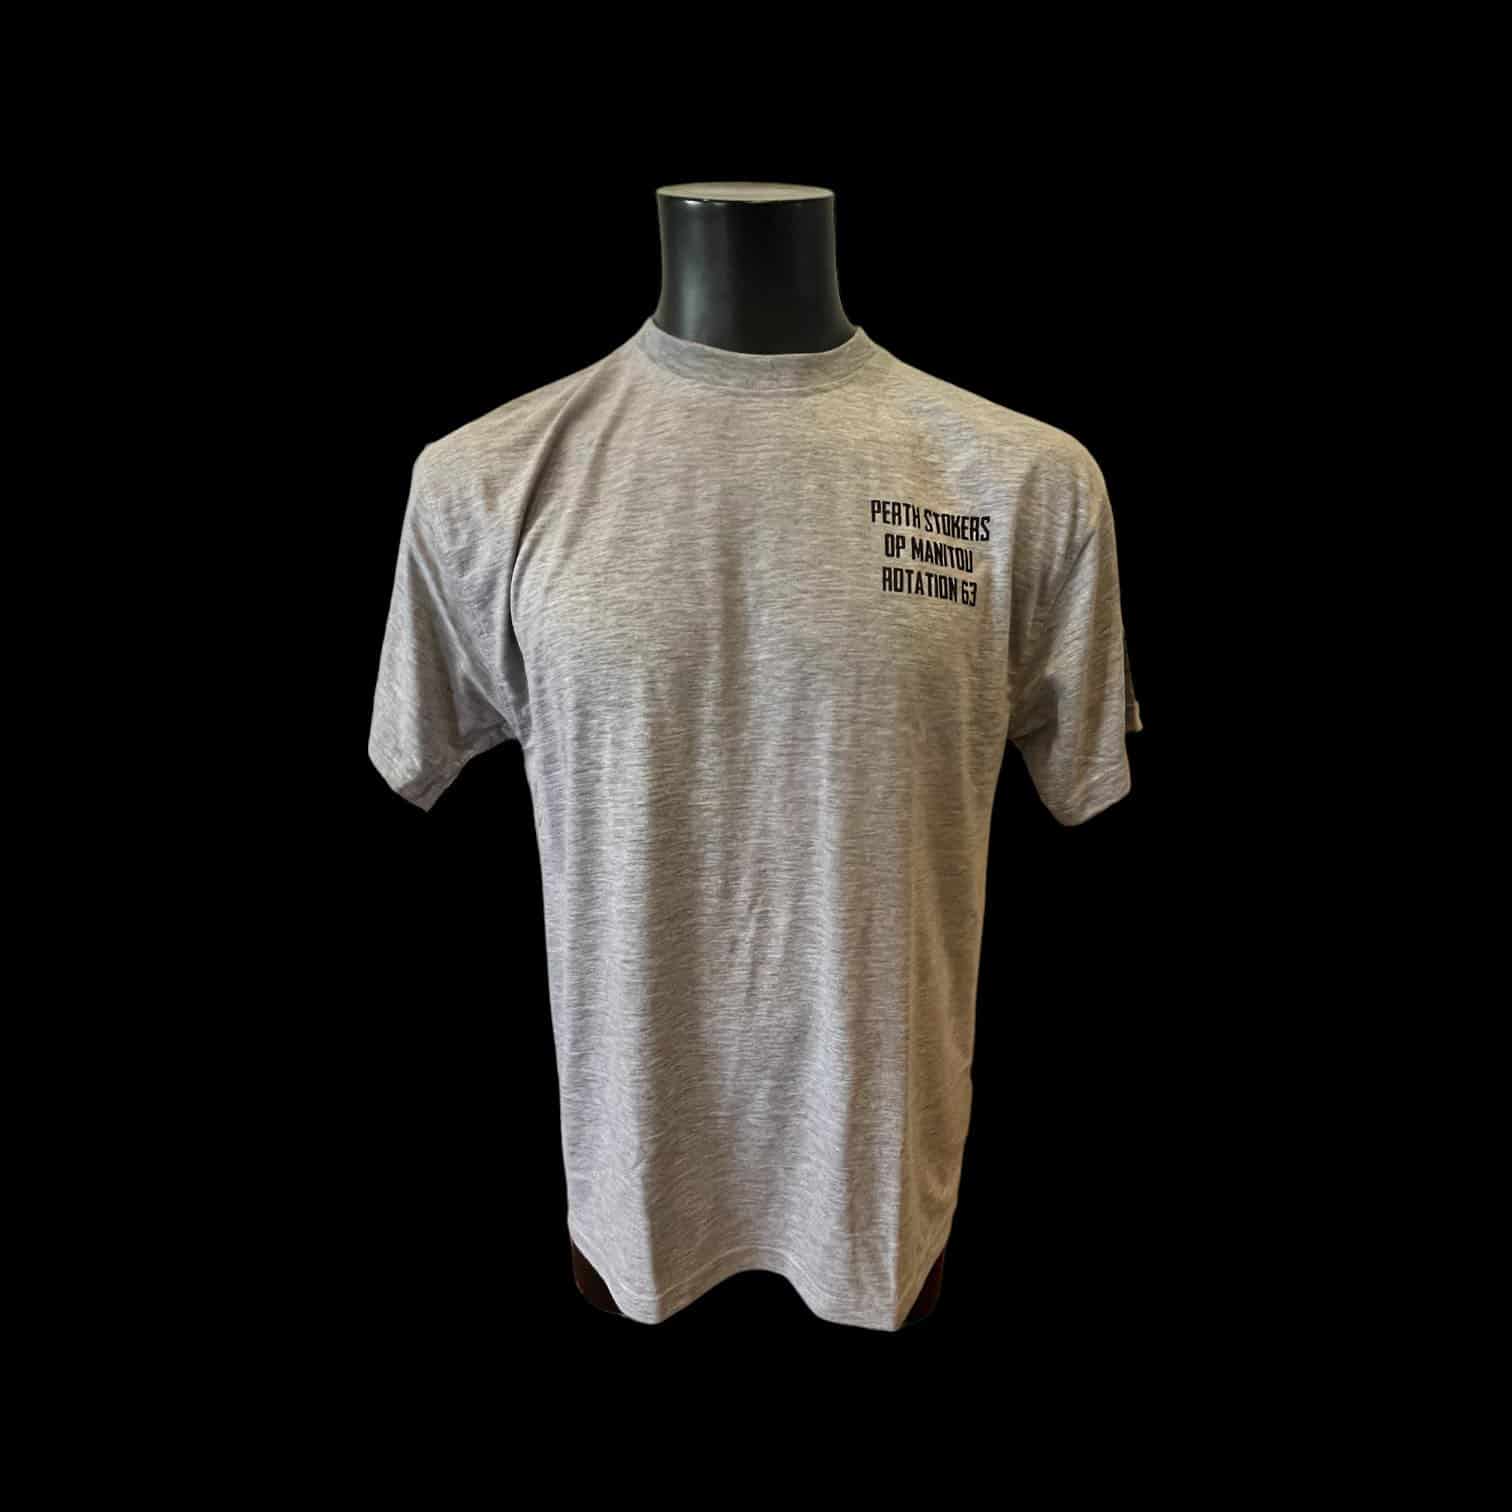 PERTH STOKERS - OP MANITOU PT T-Shirt (L) (MS007) | Allied Militaria